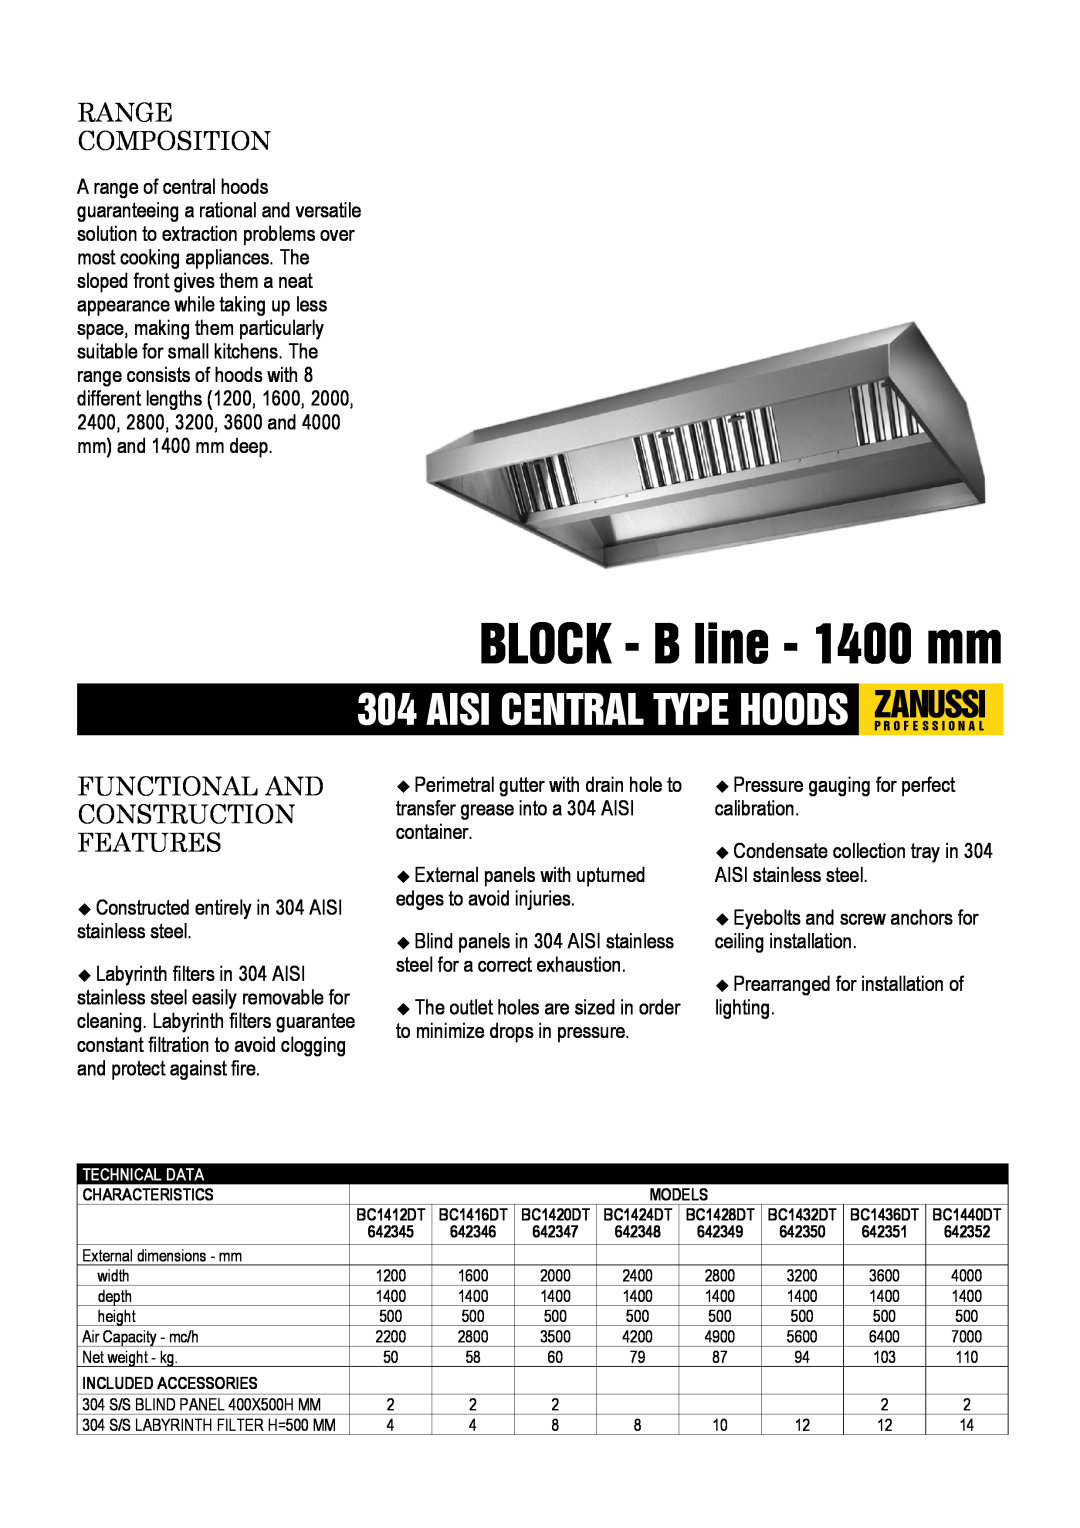 Zanussi 642347, 642350, 642348 dimensions BLOCK - B line - 1400 mm, Range Composition, Functional And Construction Features 